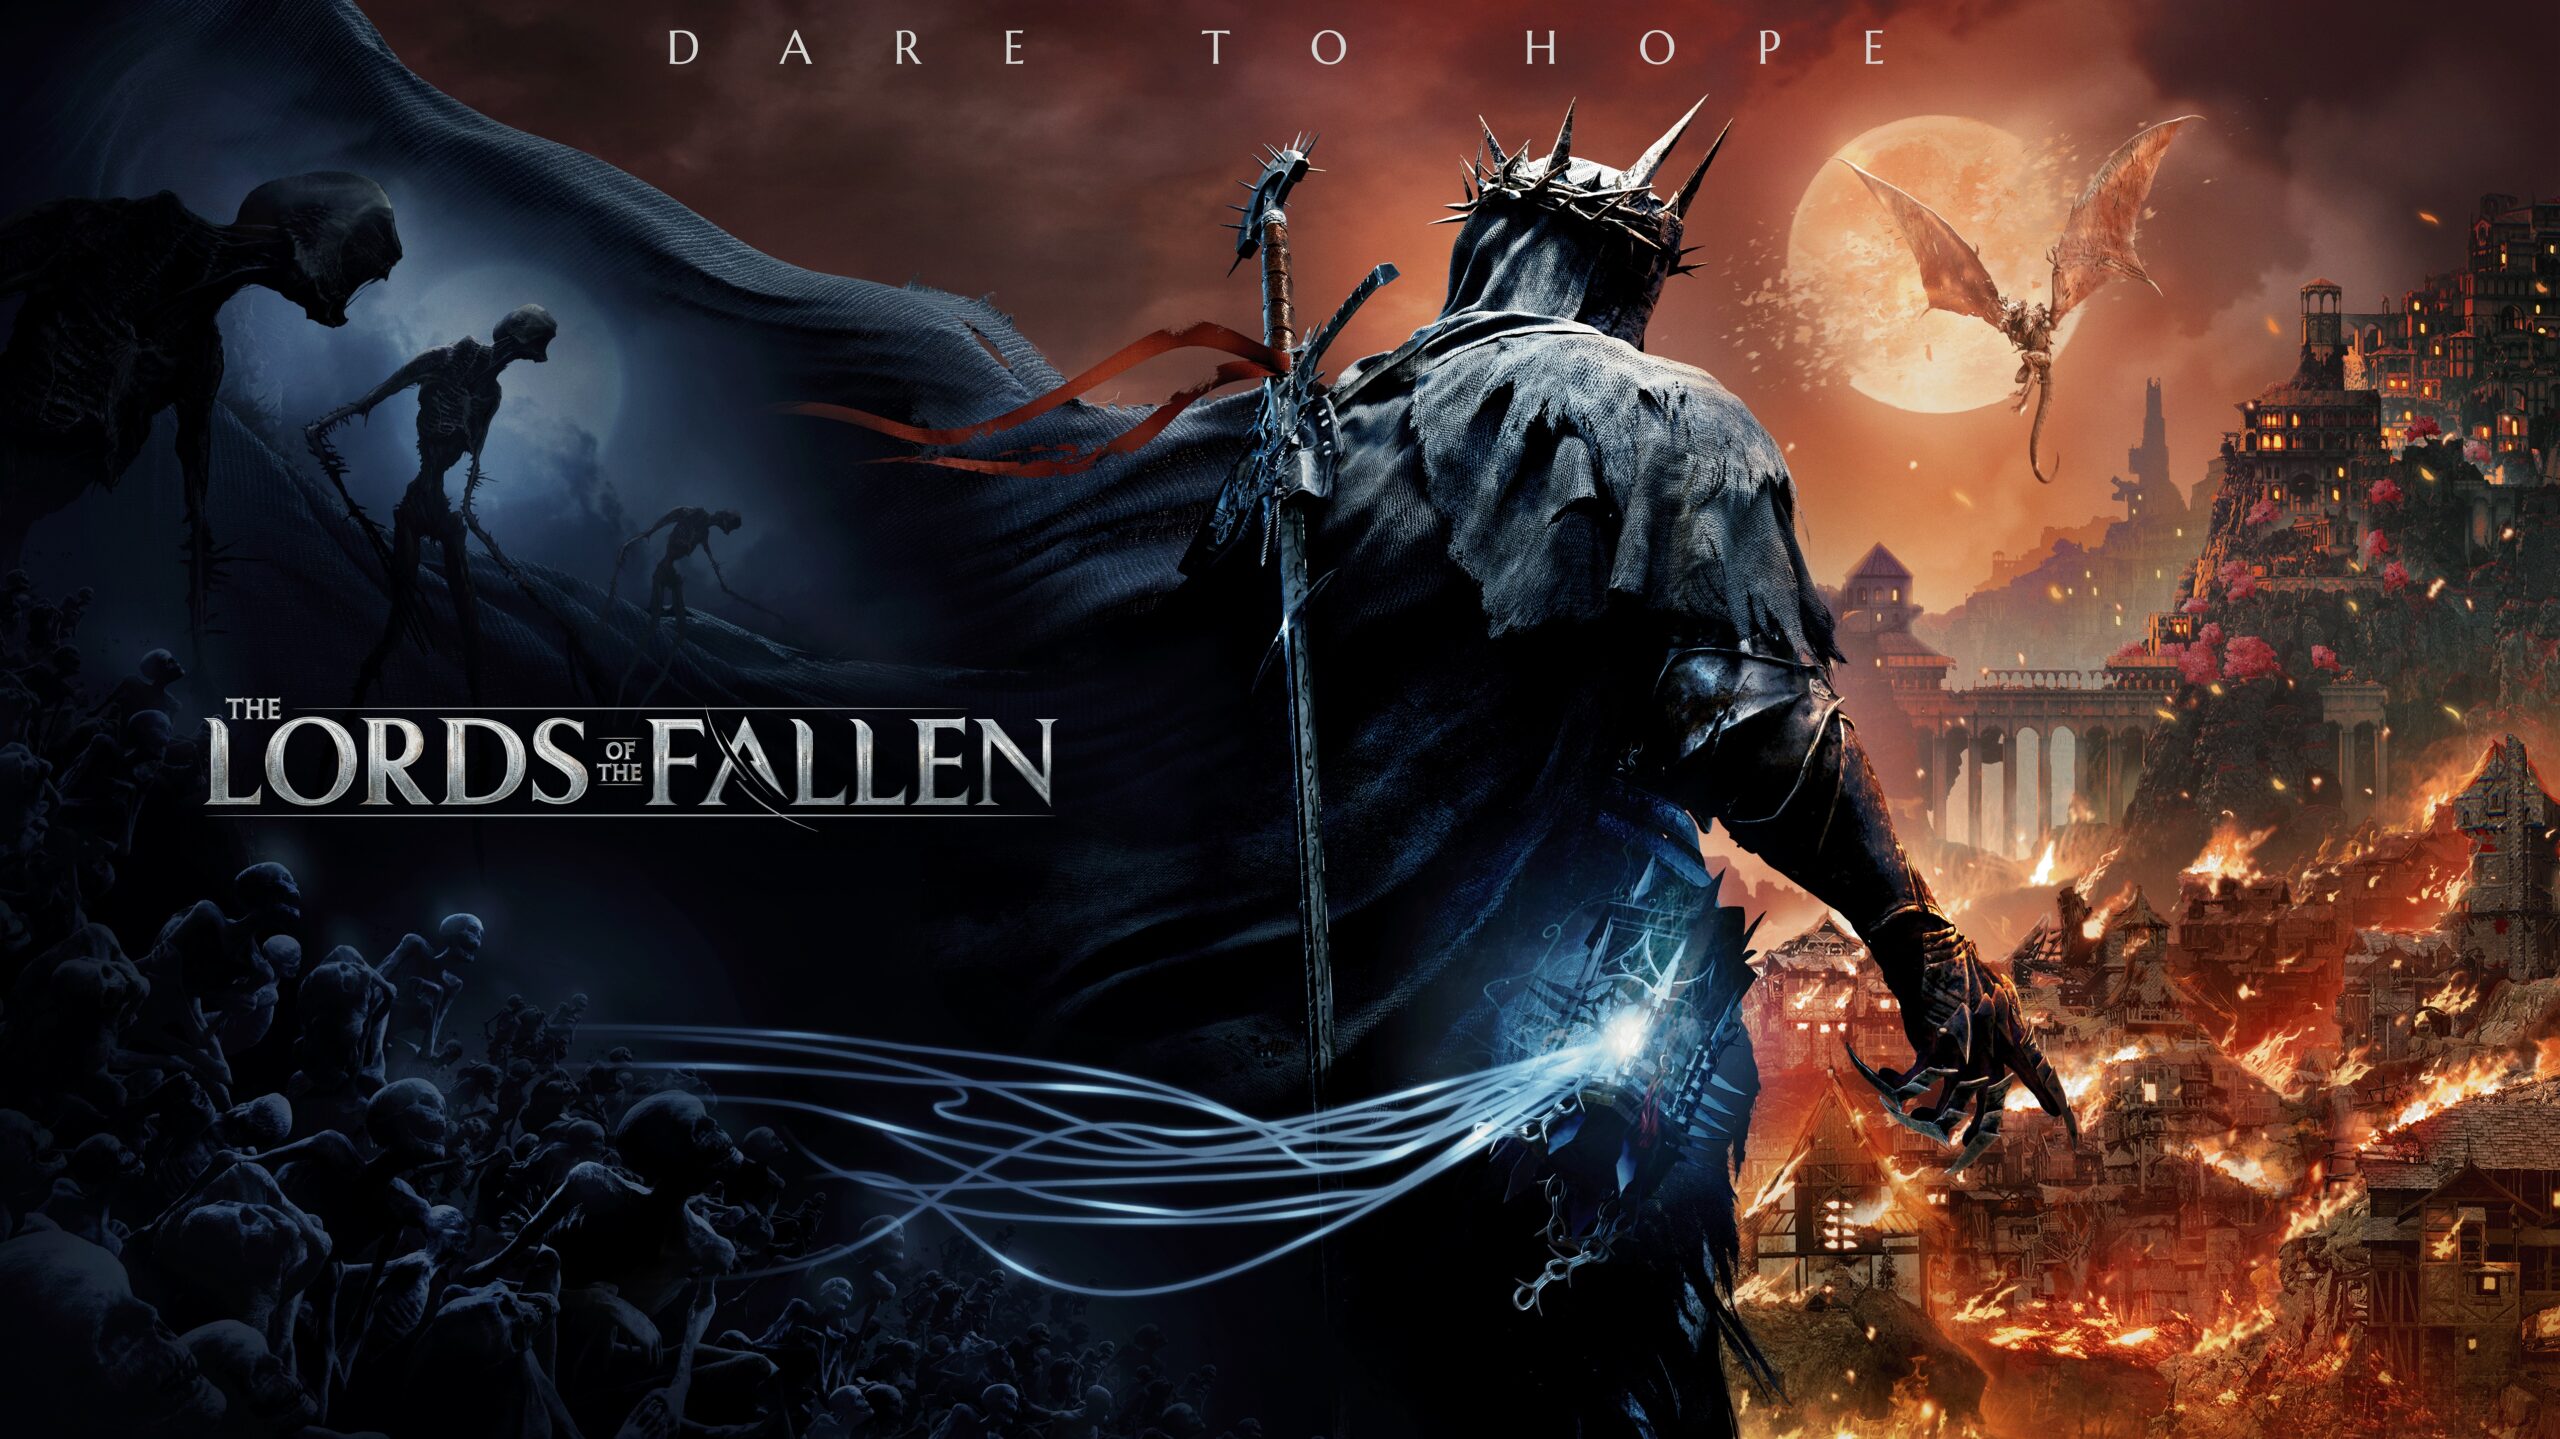 Lords of the Fallen Reveals Ambitious Roadmap and Free Update Plans